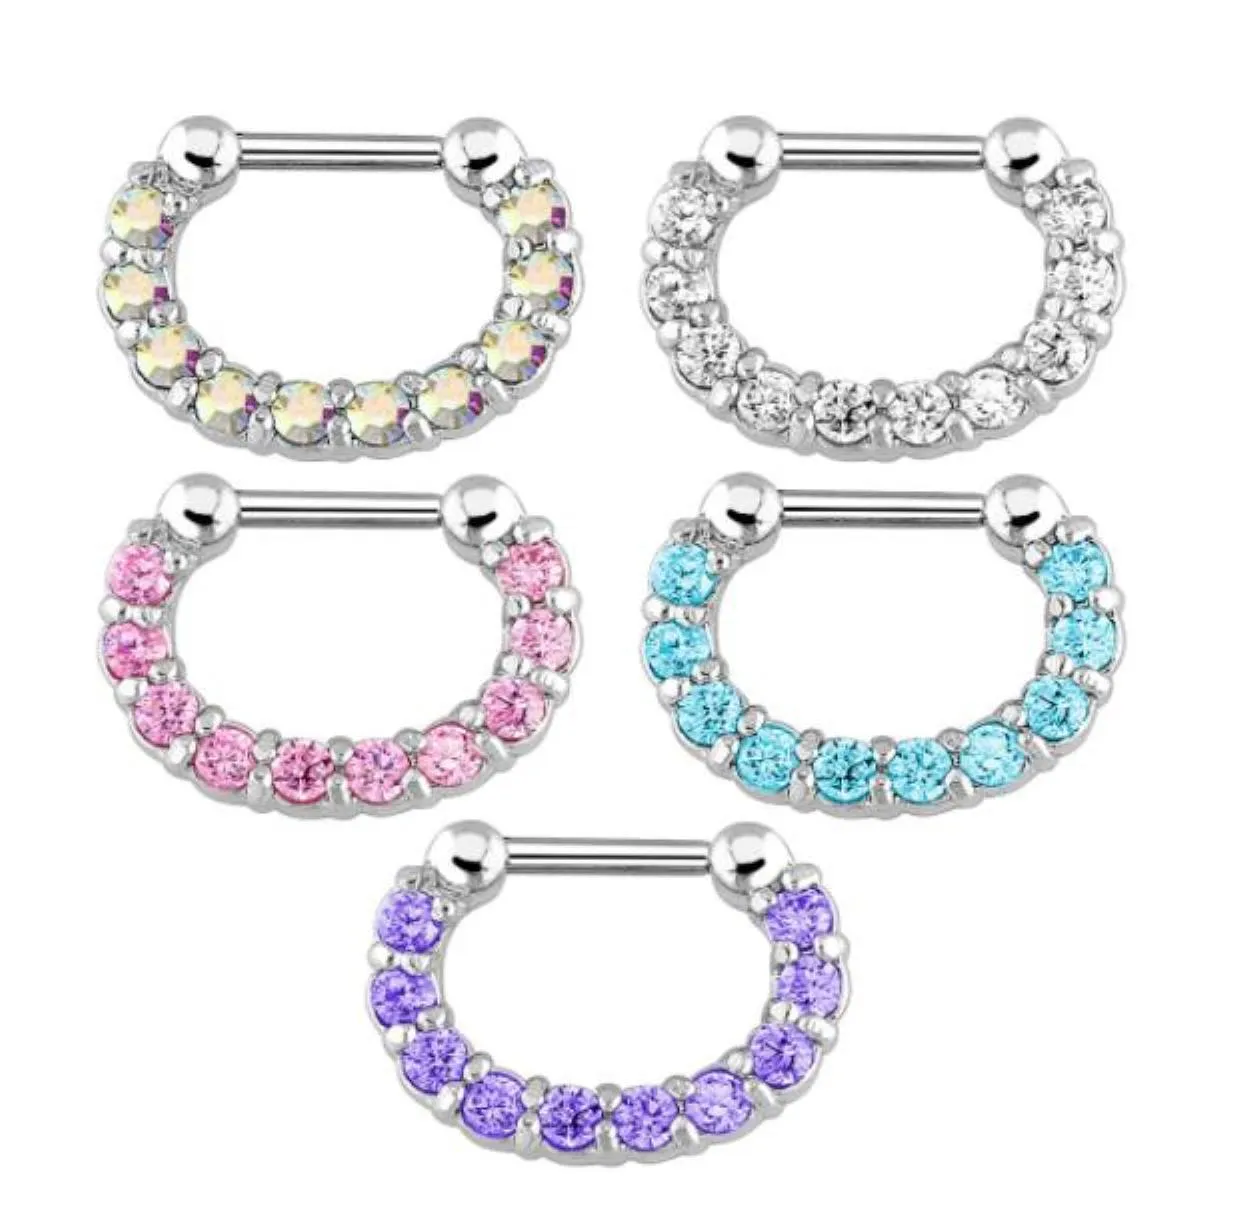 30Pcs Rhinestone Crystal Nose Hoops Unisex Surgical Steel Cz Septum Clicker Nose Ring Piercing Body Jewelry 6Zhmt O5Ule